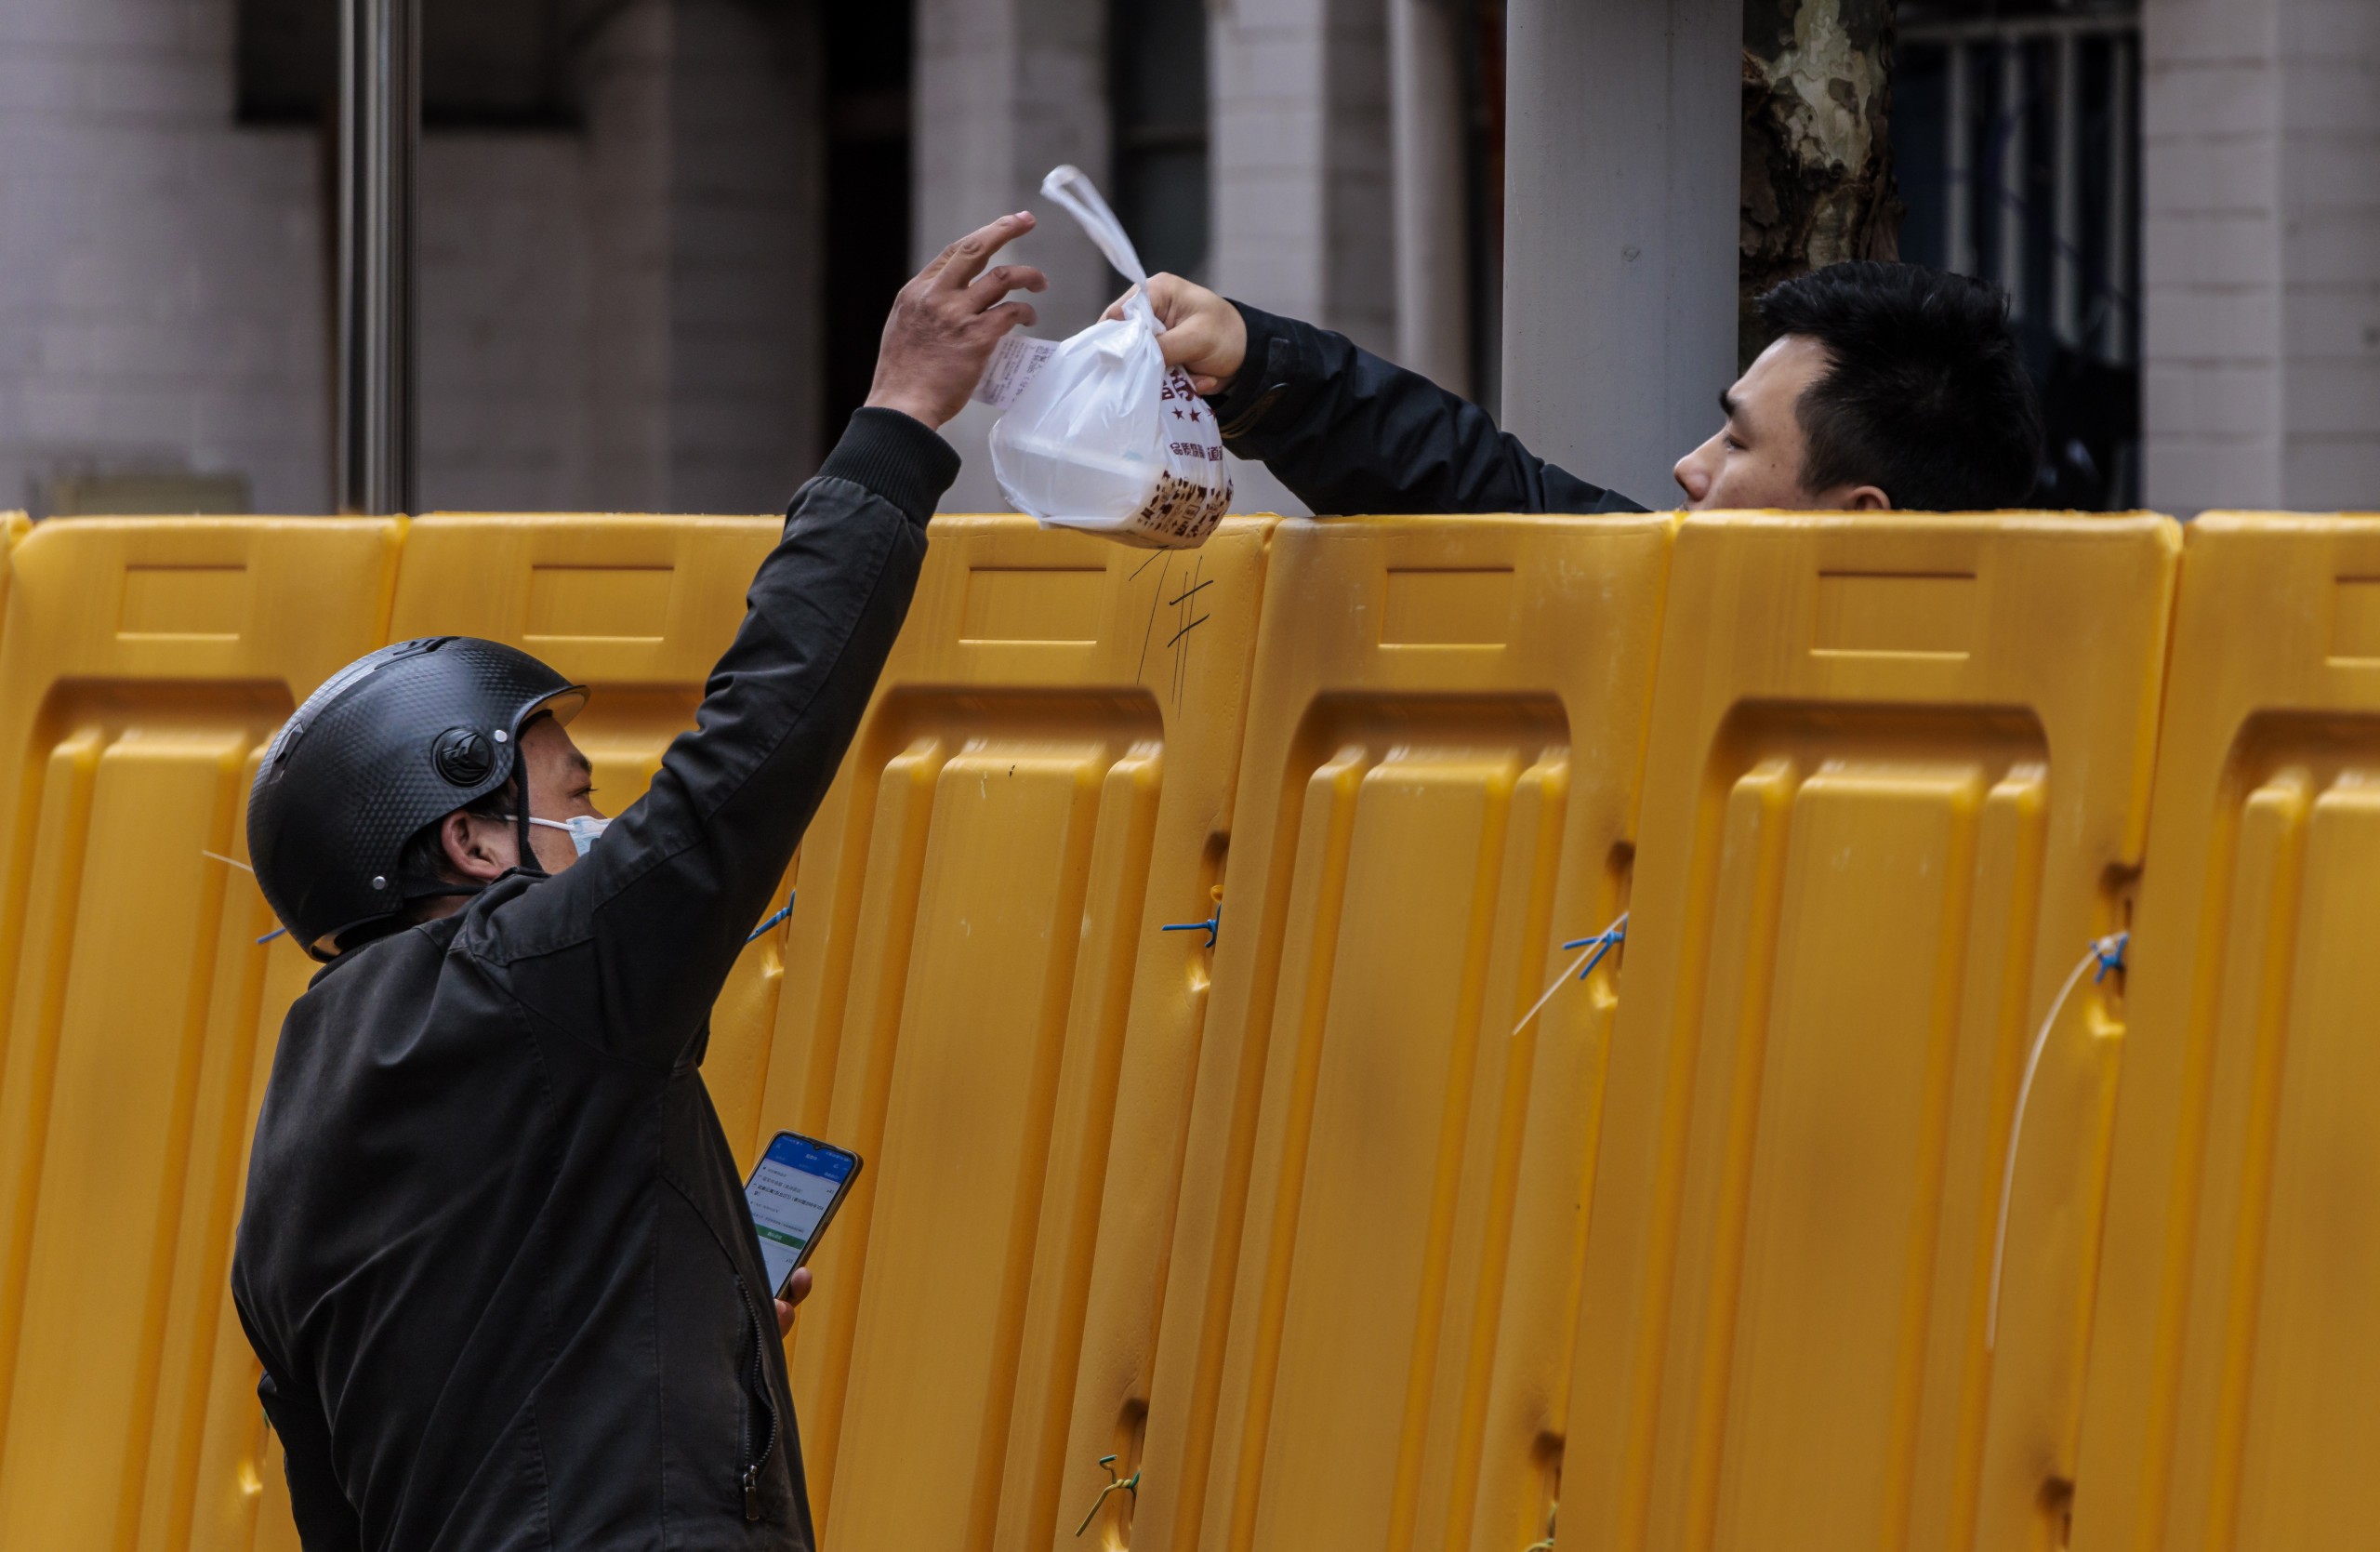 epa09861669 A man delivers food to a man in the compound under quarantine amid the lockdown, in Puxi side of the city, in Shanghai, China, 31 March 2022. Shanghai city imposed a strict lockdown amid the COVID-19 resurgence. A complete lockdown hits the two biggest areas in the city, divided by the Huangpu River. East of the Huangpu River, Pudong area, lockdown started on 28 March while west area, Puxi, will have a lockdown from 01 April.  EPA/ALEX PLAVEVSKI